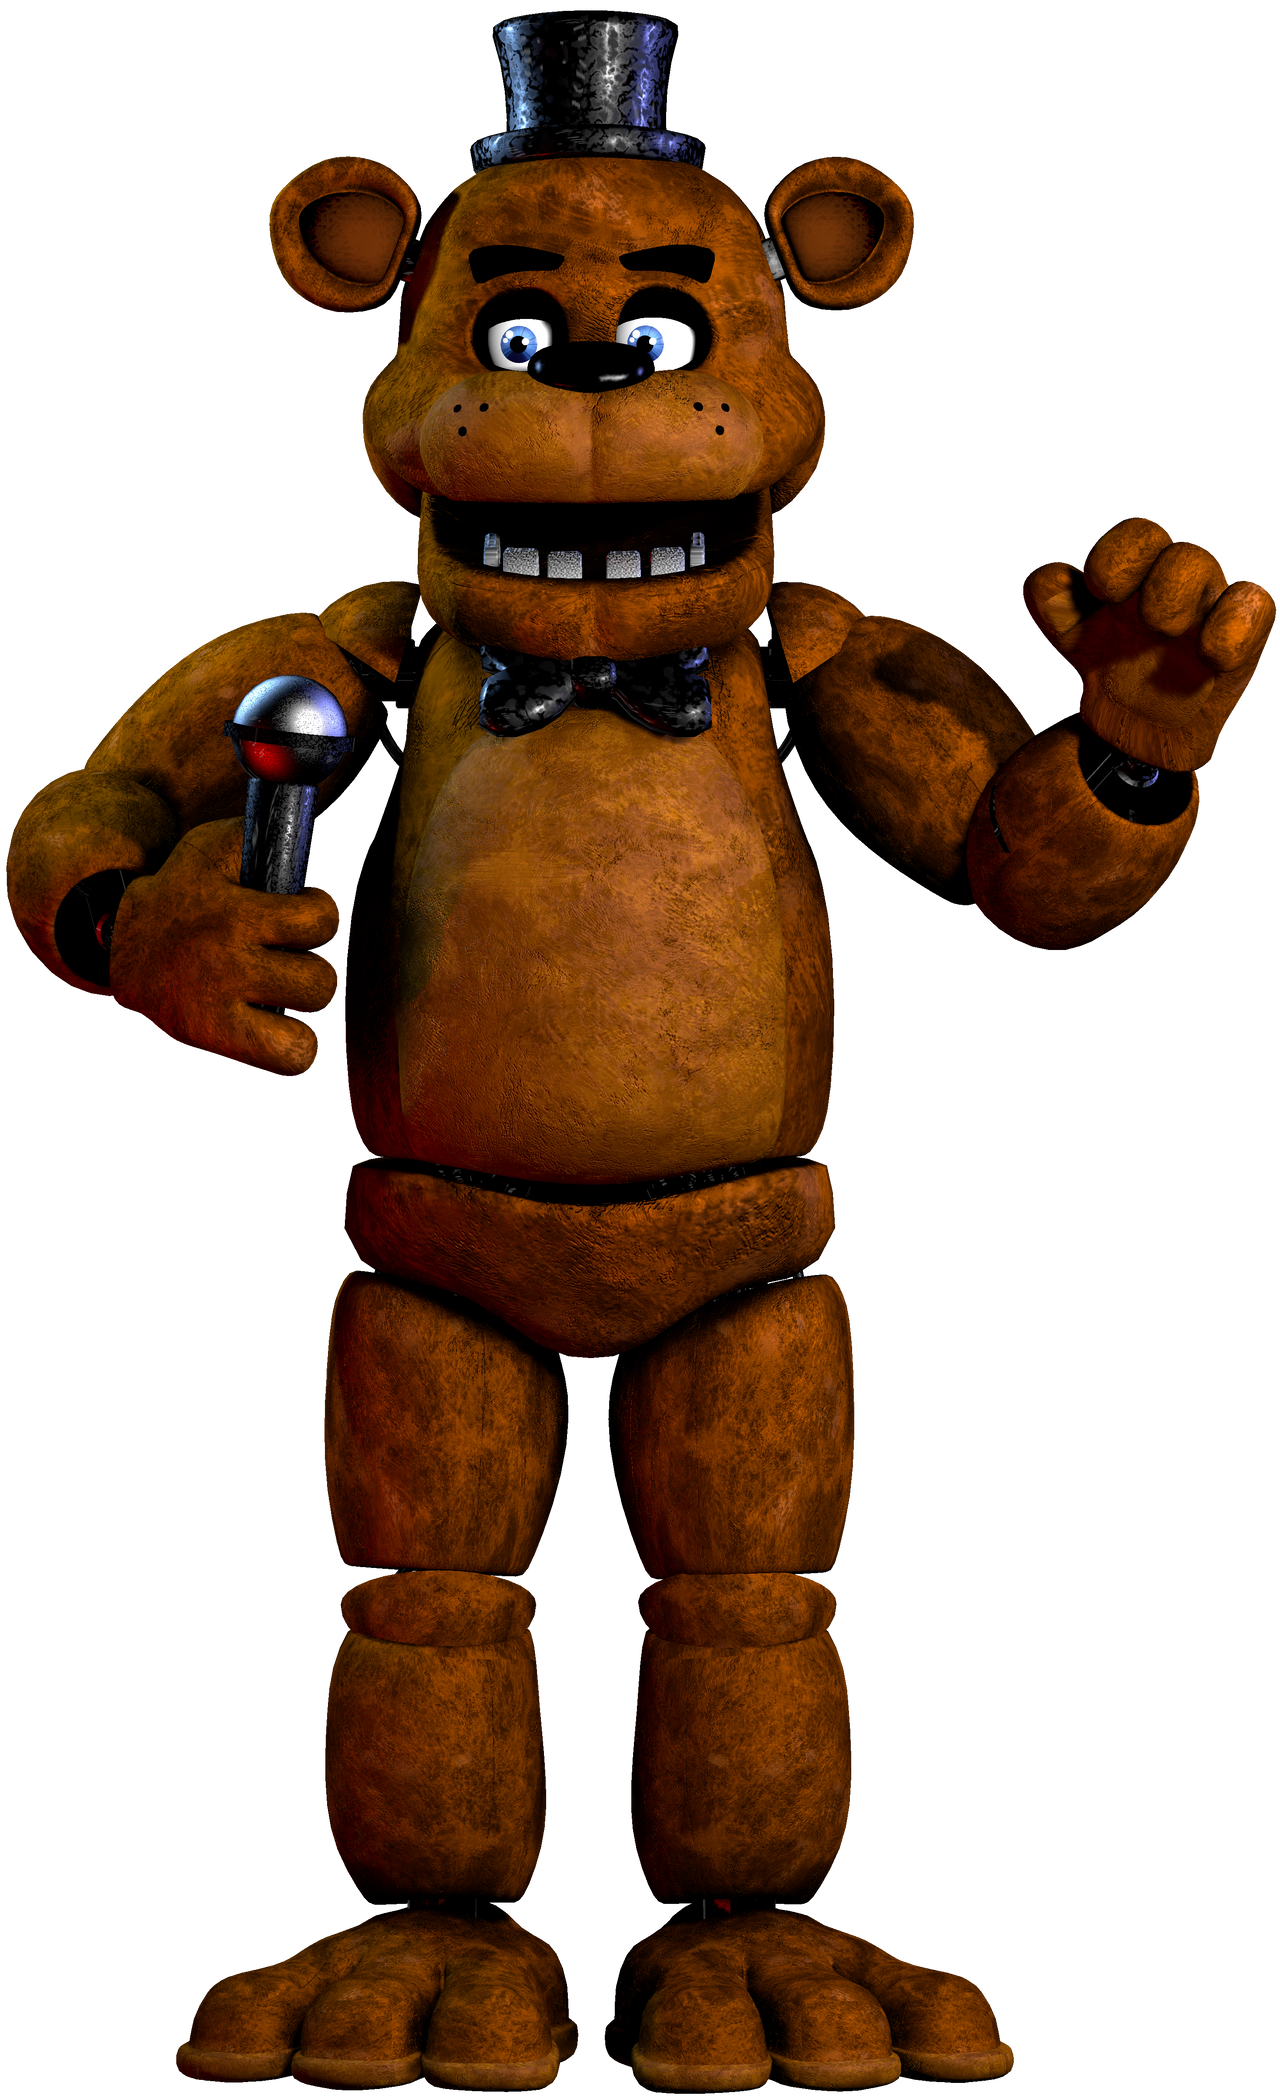 FNaF2/SFM) Withered Toy Chica by Zoinkeesuwu on DeviantArt